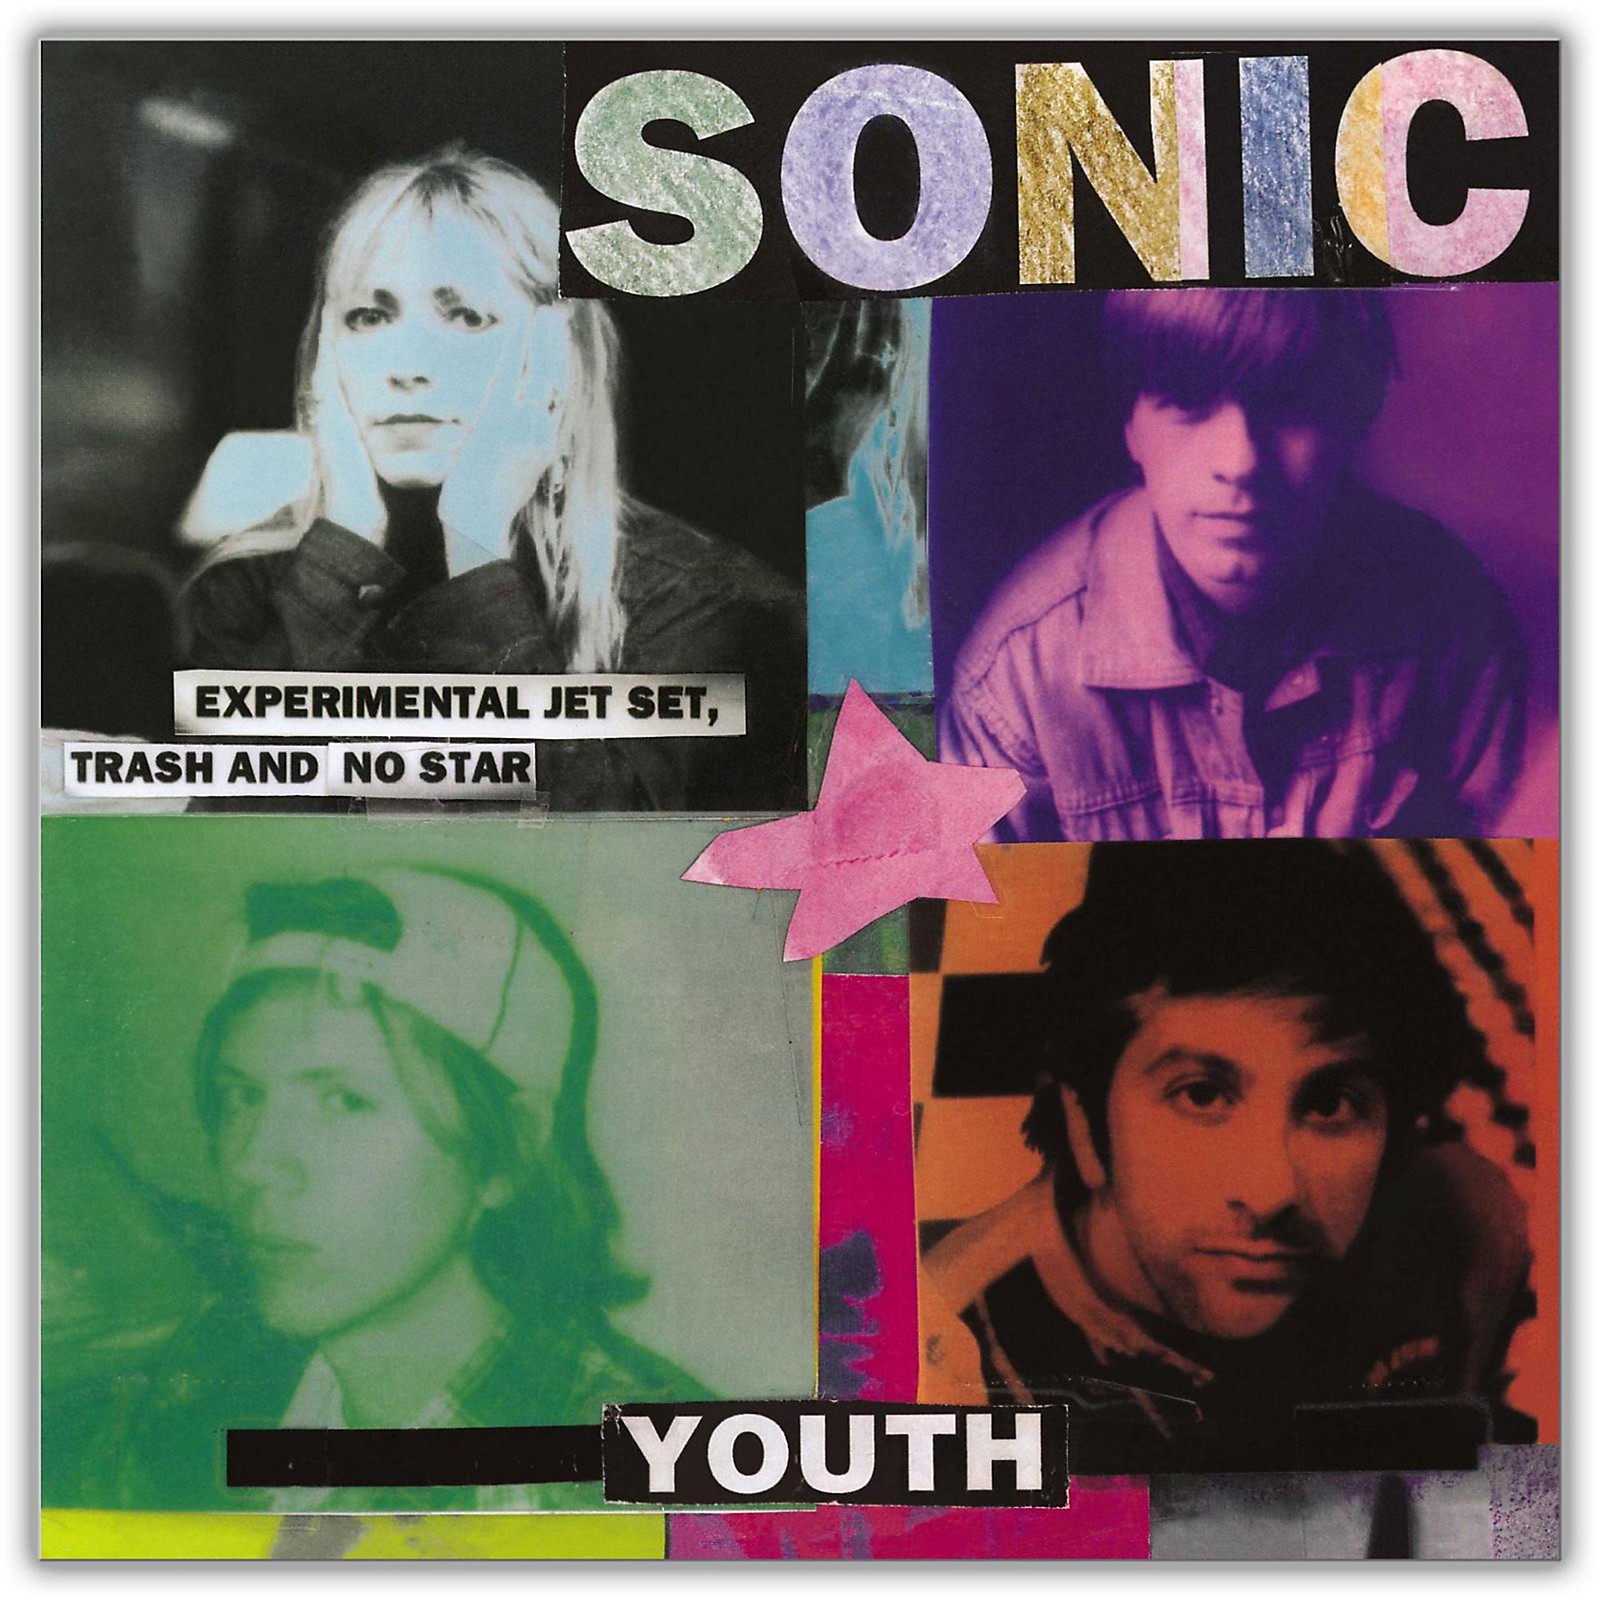 sonic youth superstar video director